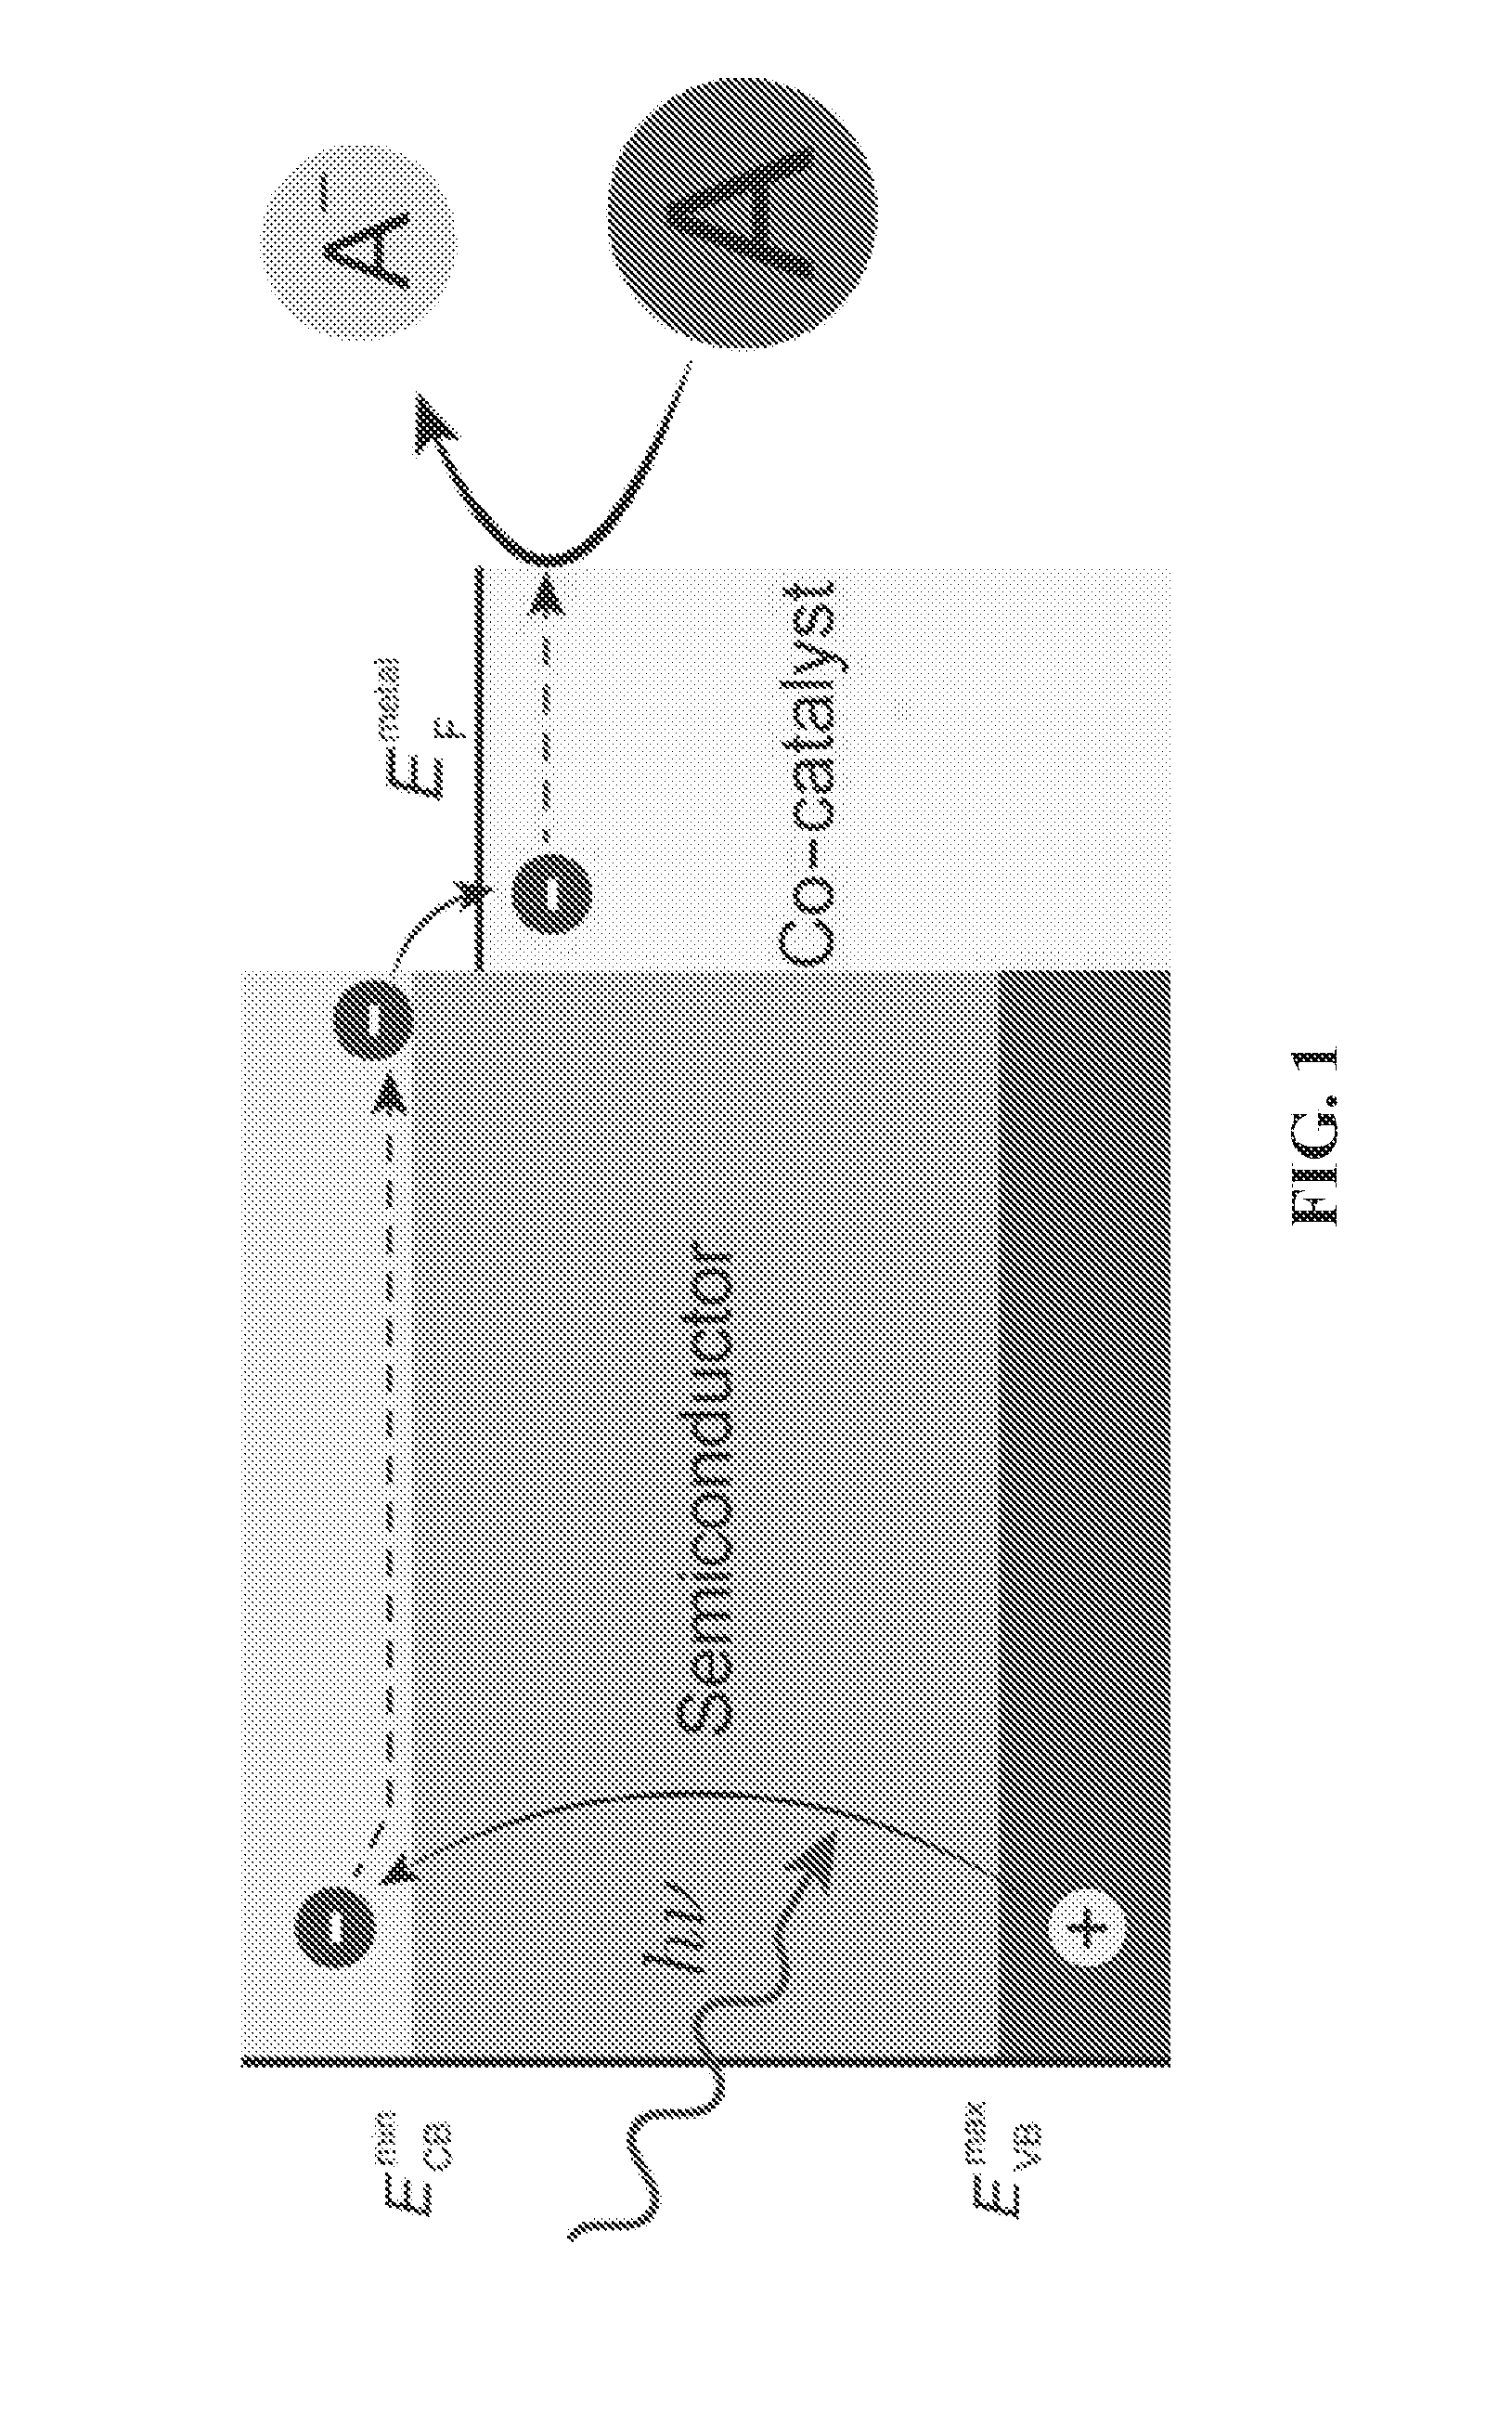 Tandem photochemical-thermochemical process for hydrocarbon production from carbon dioxide feedstock